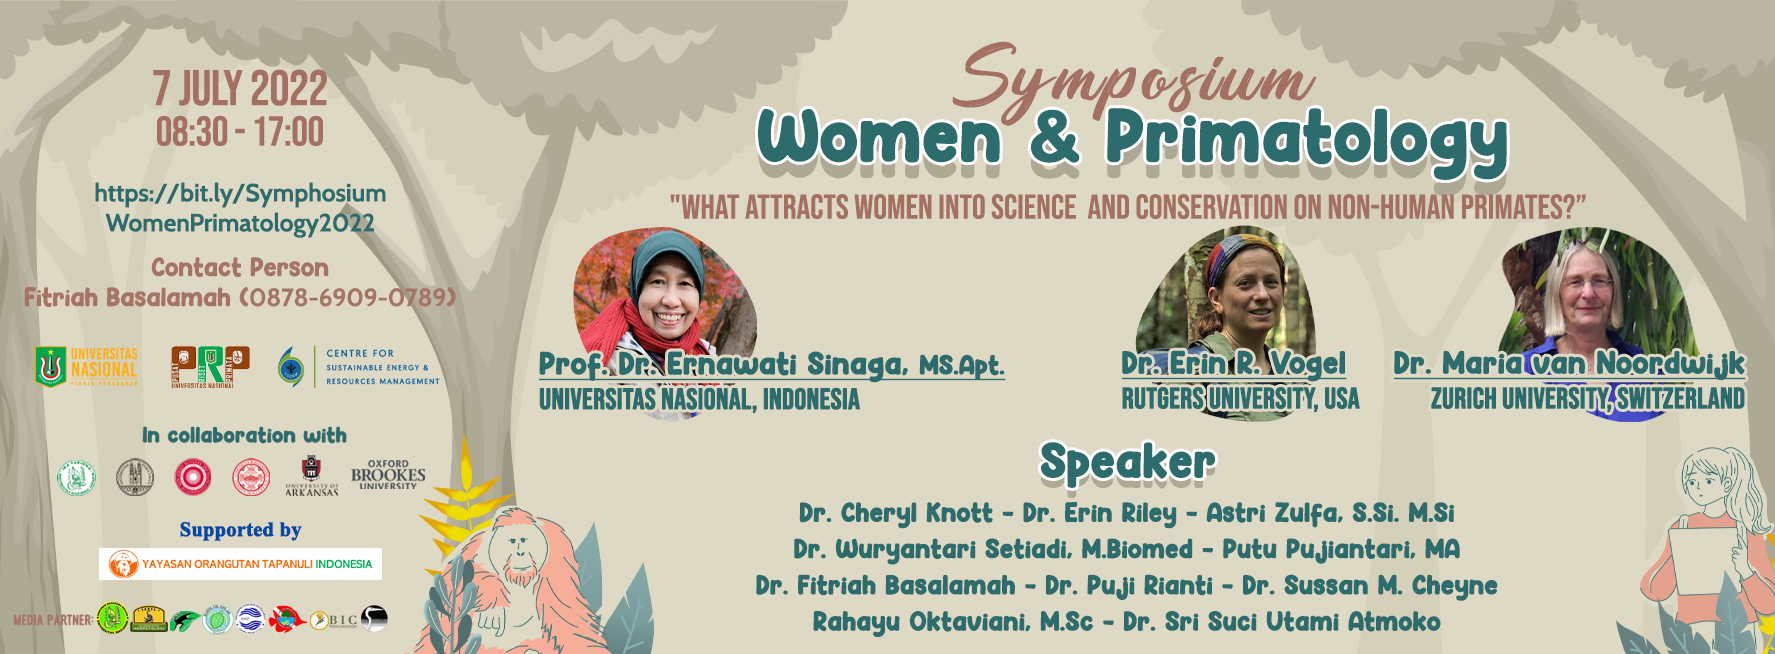 Symposium: Women And Primatology “What Attracts Female Into Science And Conservation Of Non-Human Primates”